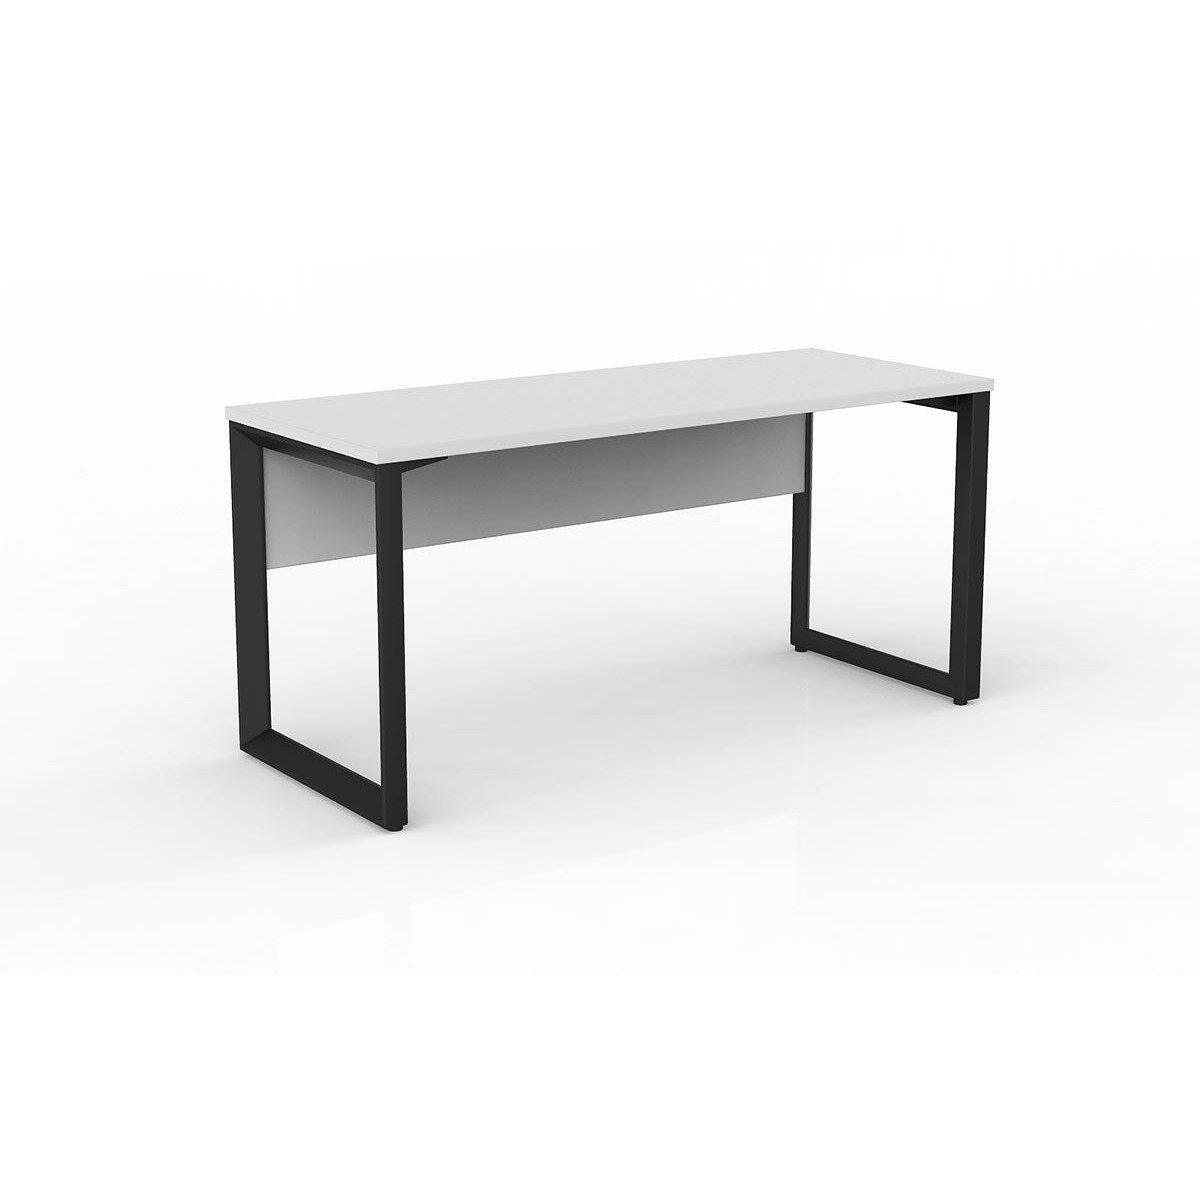 Anvil Single Straight Desk with Modesty - Office Furniture Company 